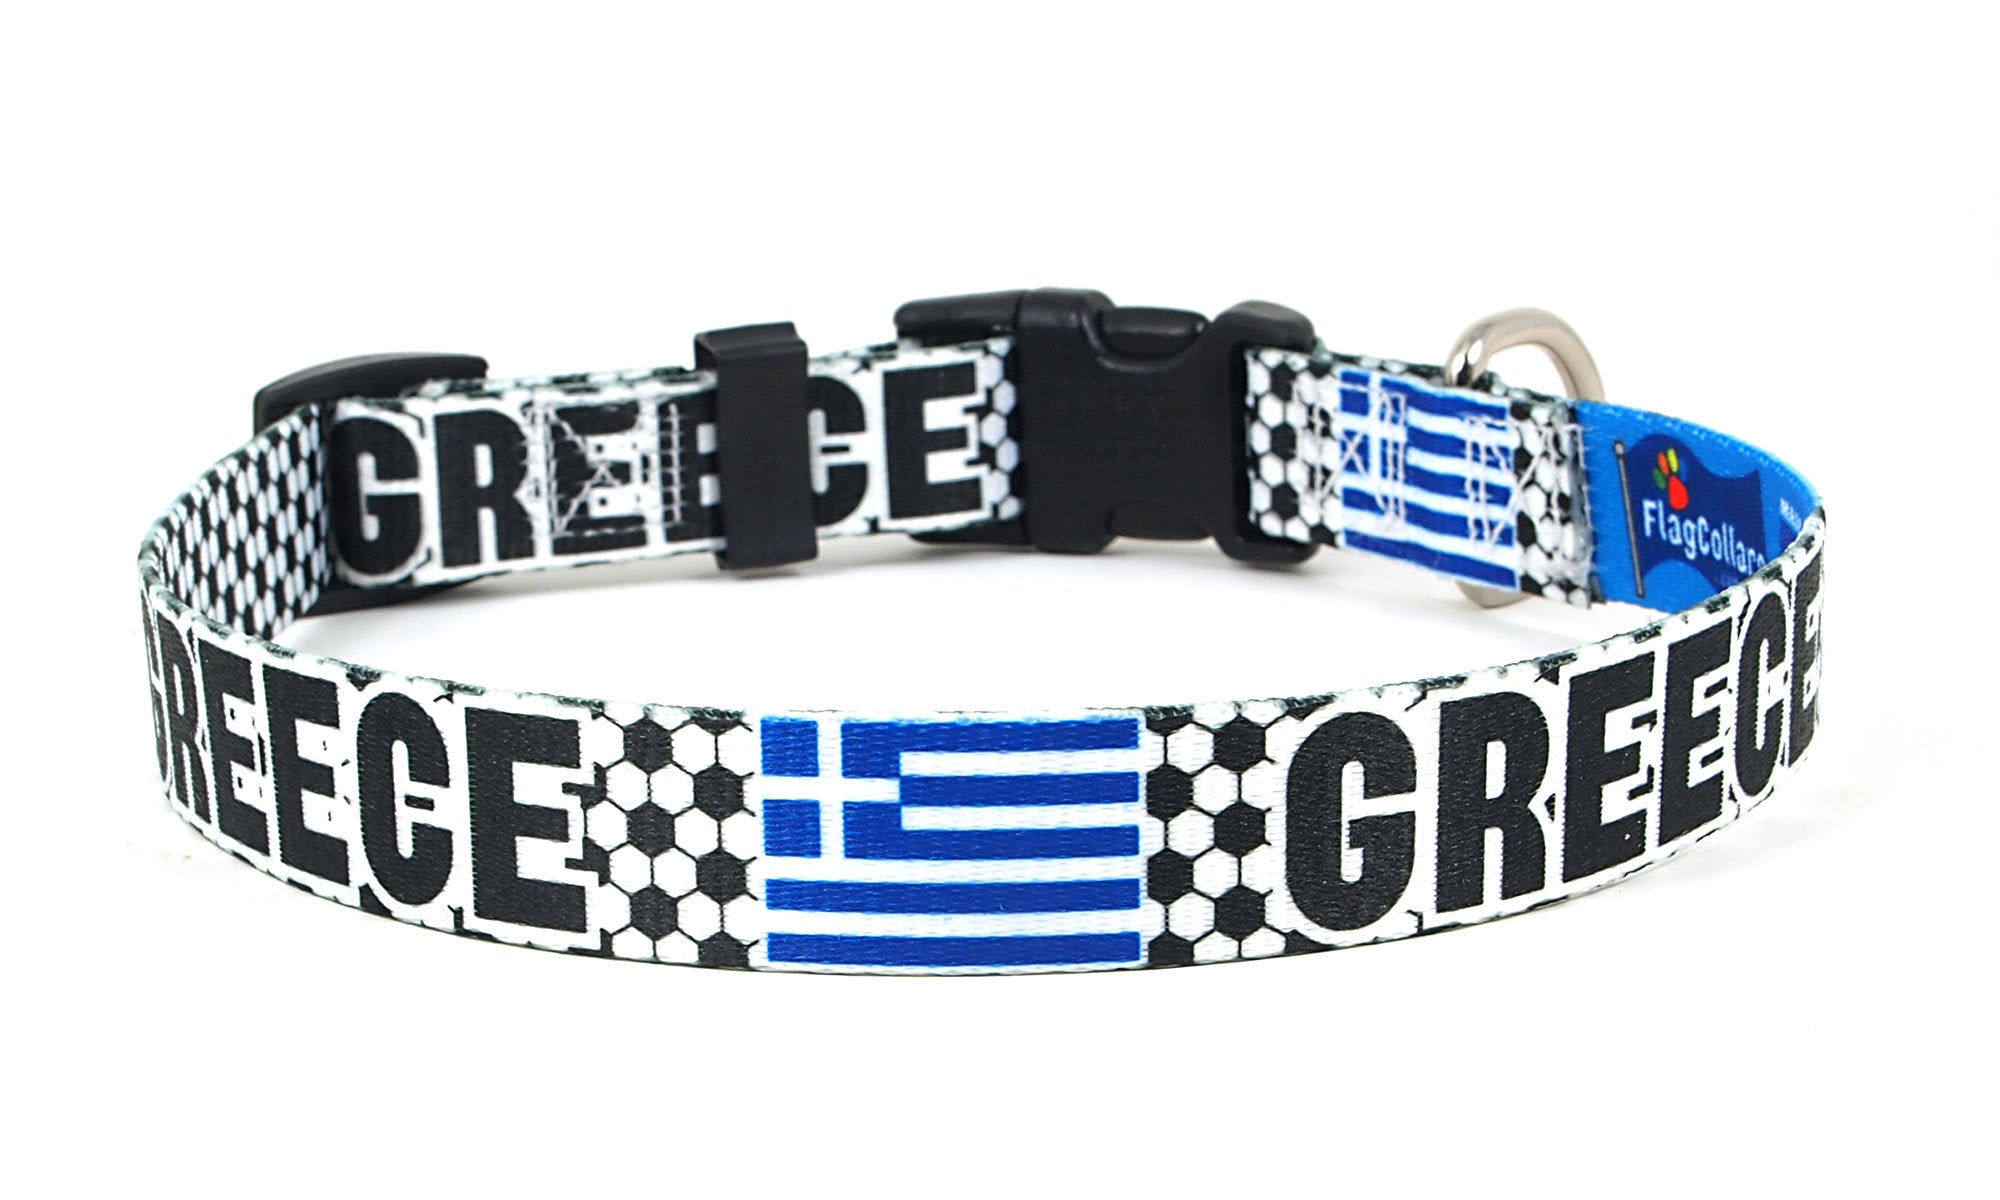 Greek Dog Collar for Soccer Fans | Black or Pink | Quick Release or Martingale Style | Made in NJ, USA